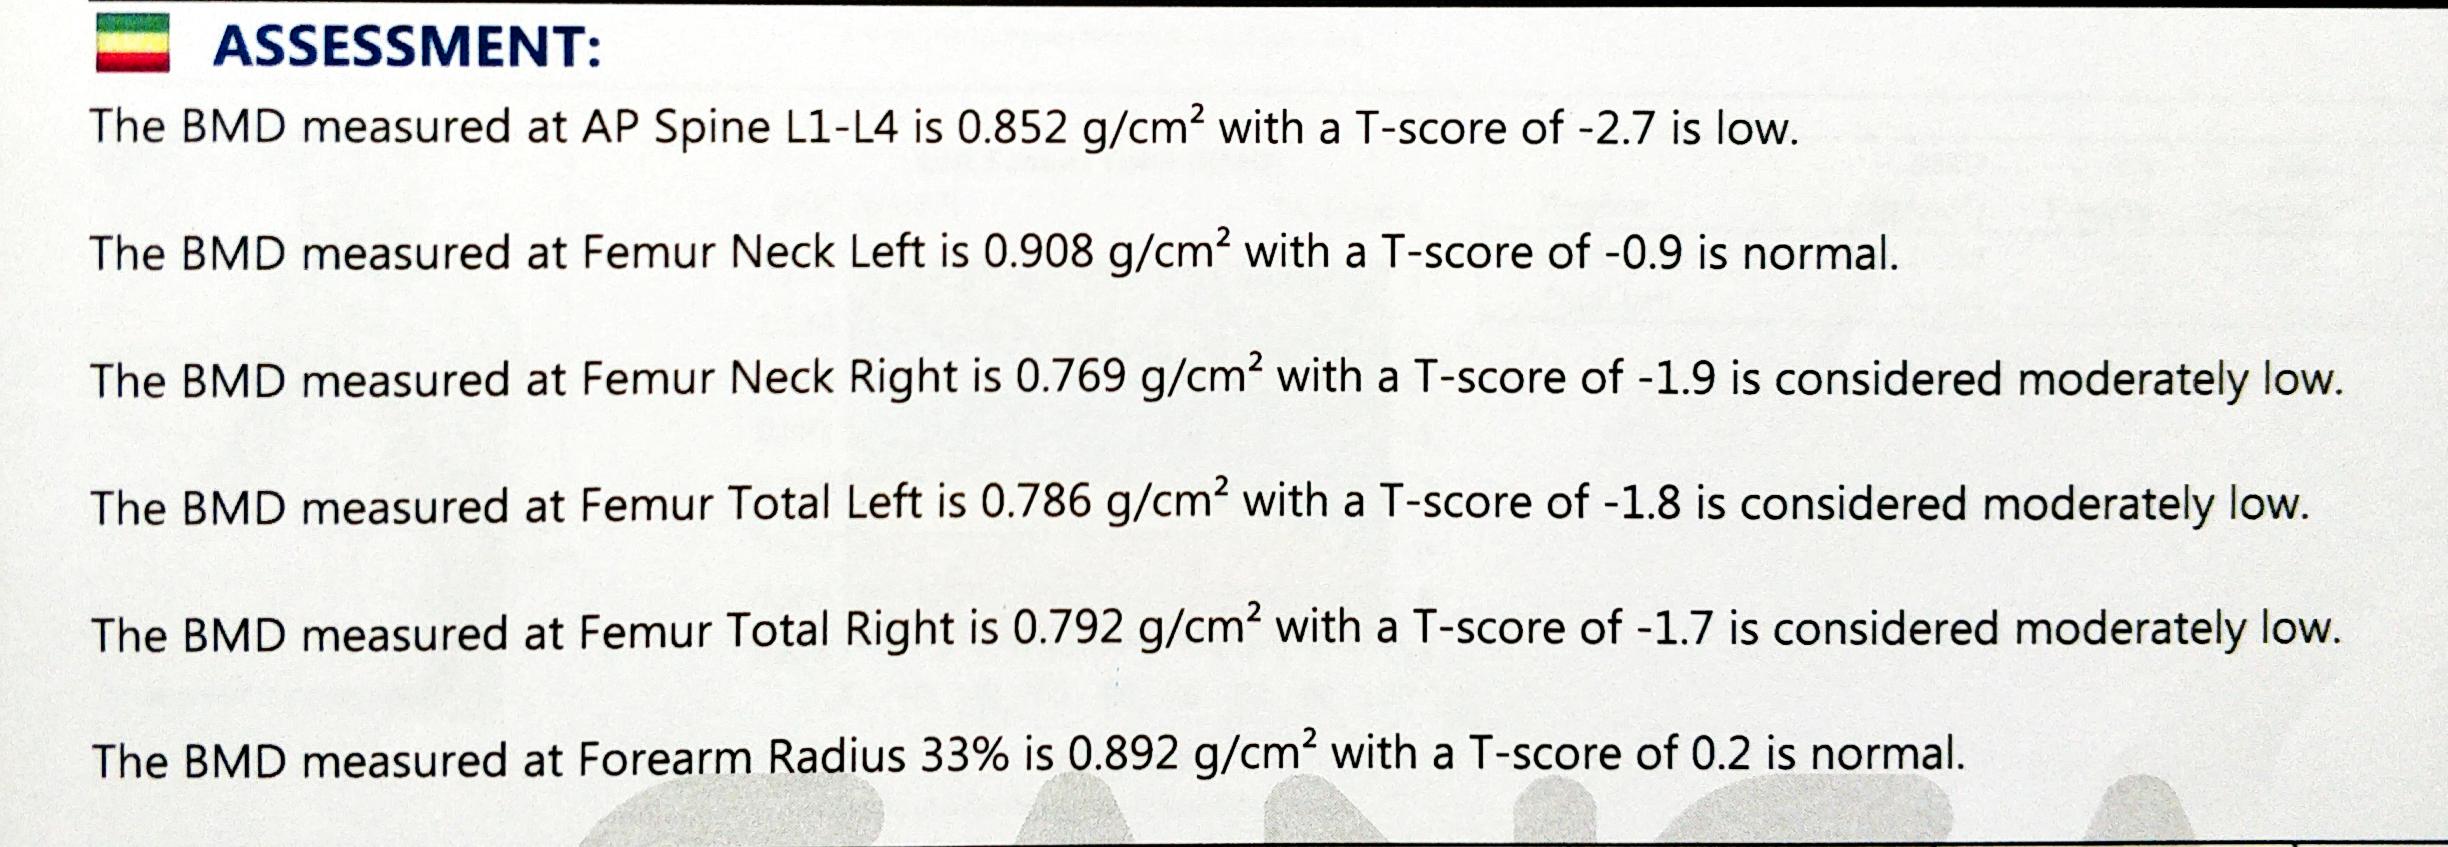 Example of a standard BMD scan assessment section with only T-scores